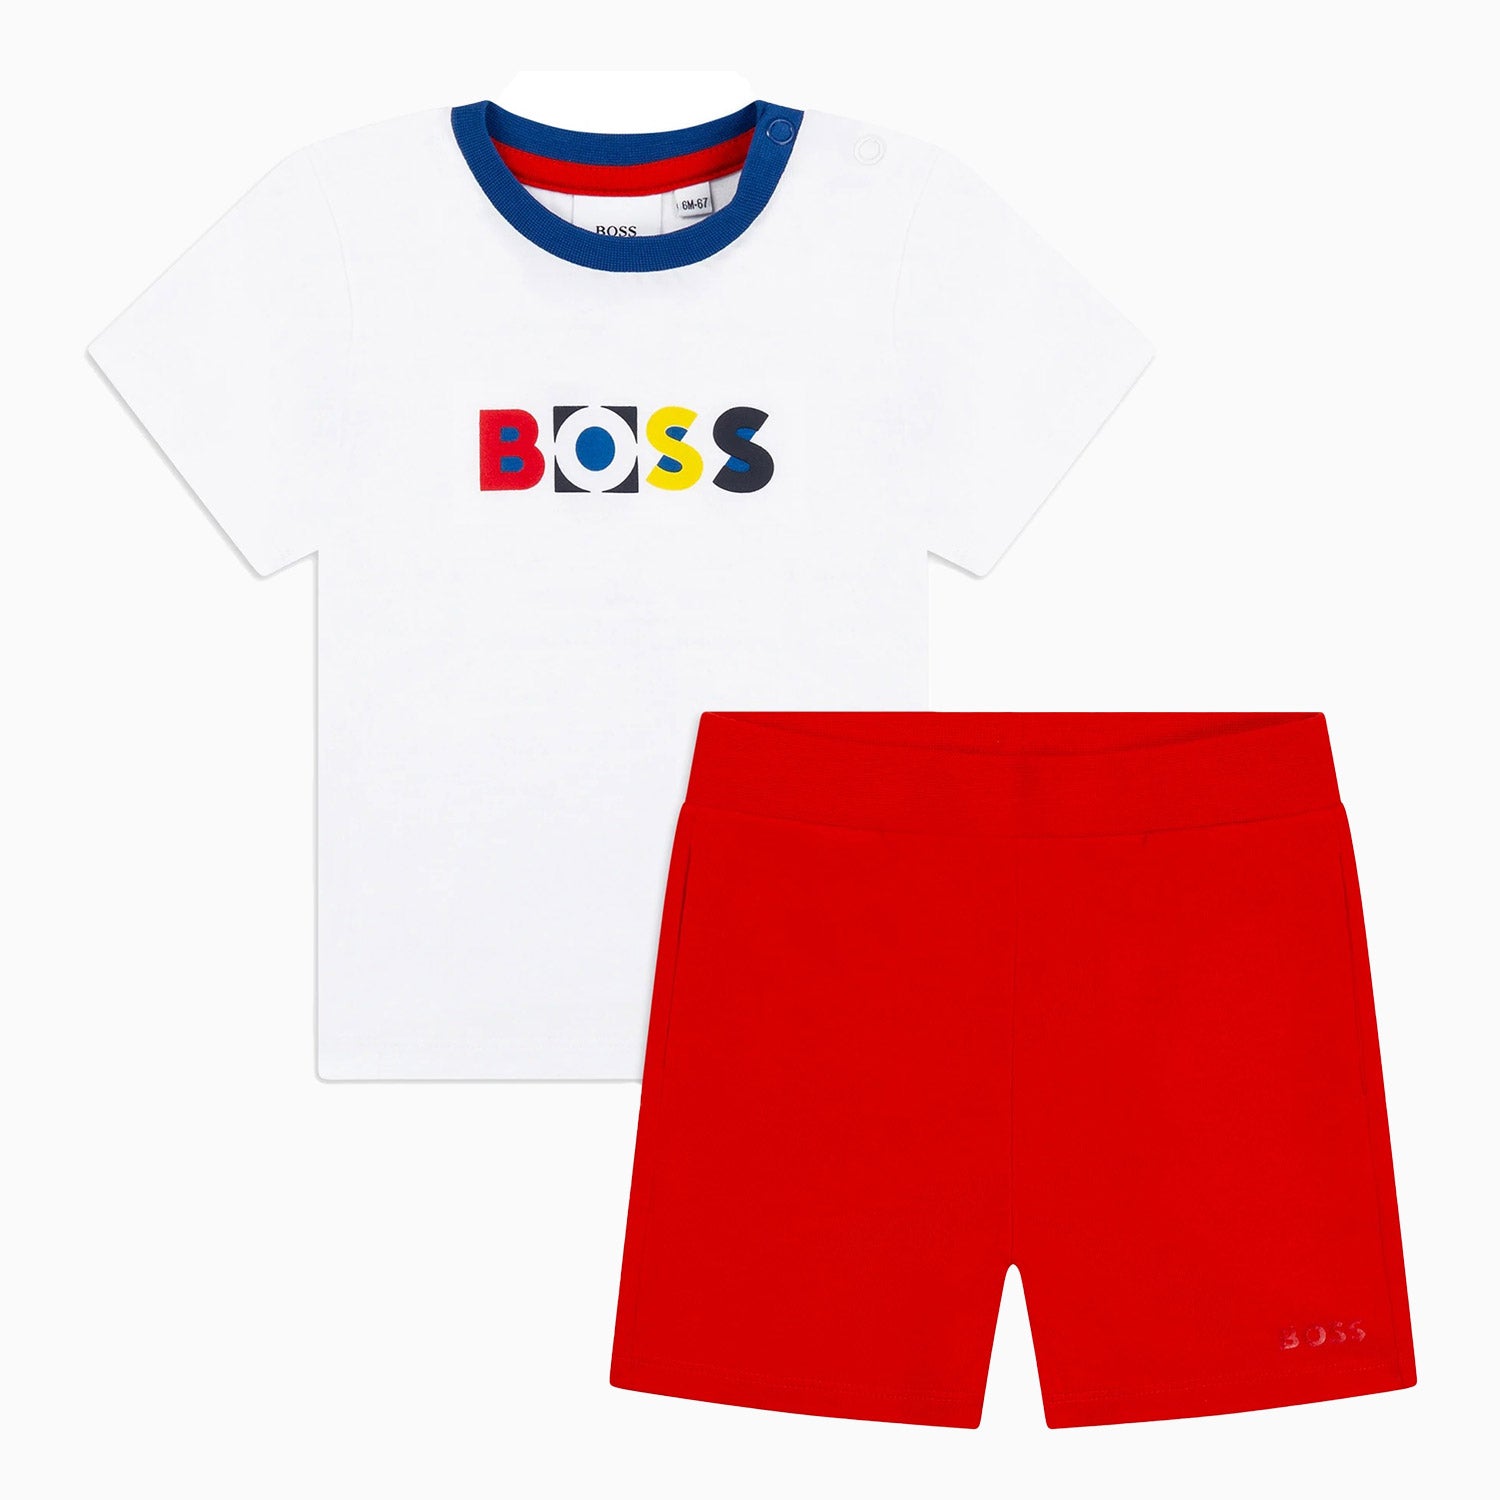 Hugo Boss Kid's T Shirt And Shorts Outfit Toddlers - Color: Bright Red - Kids Premium Clothing -